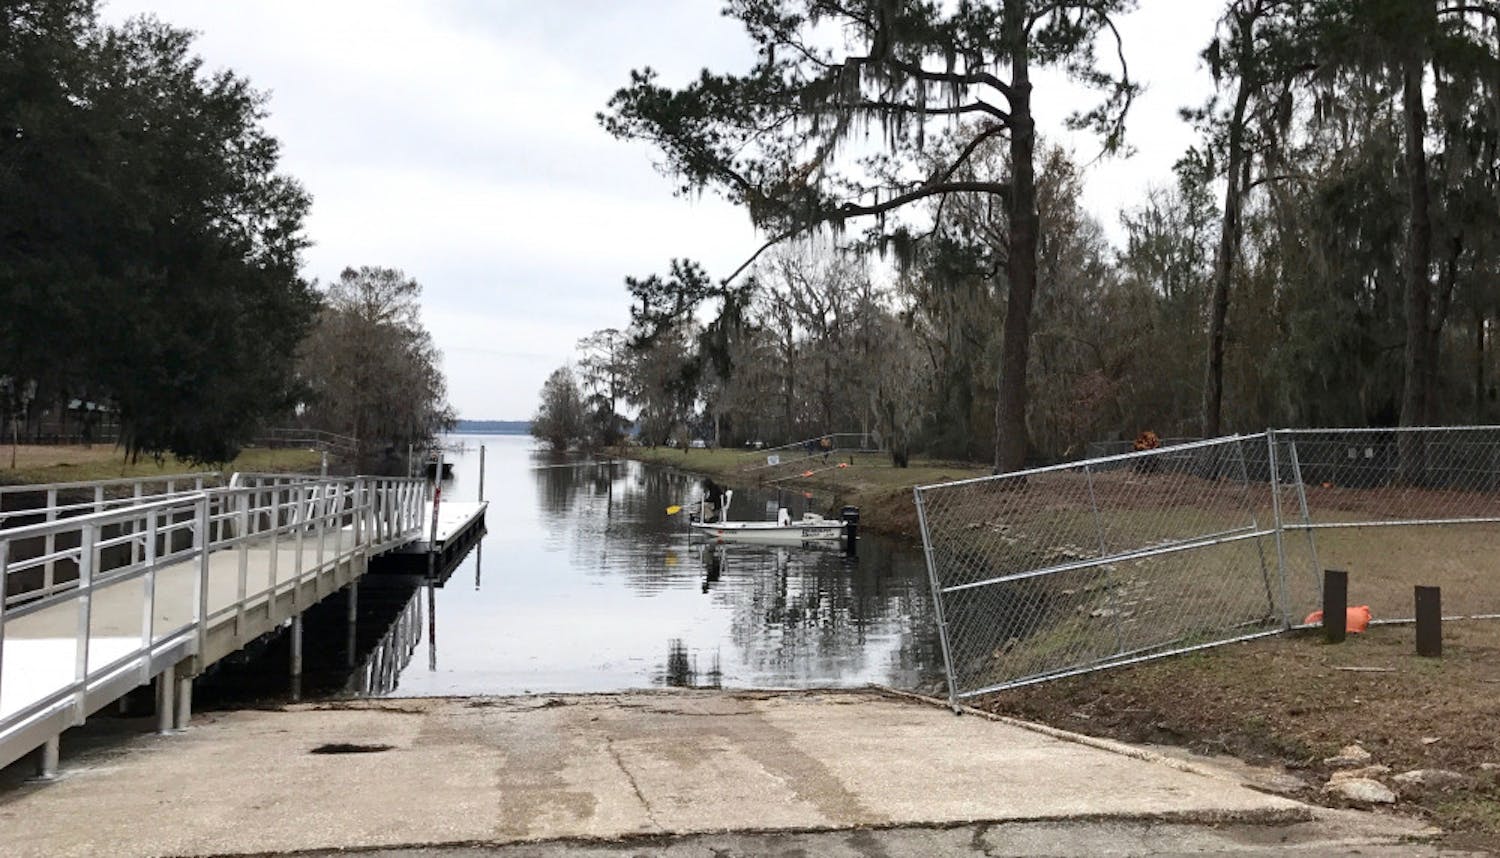 Earl P. Powers Park on Newnans Lake experienced severe flooding from Hurricane Irma, damaging the boat ramp and fishing pier. 